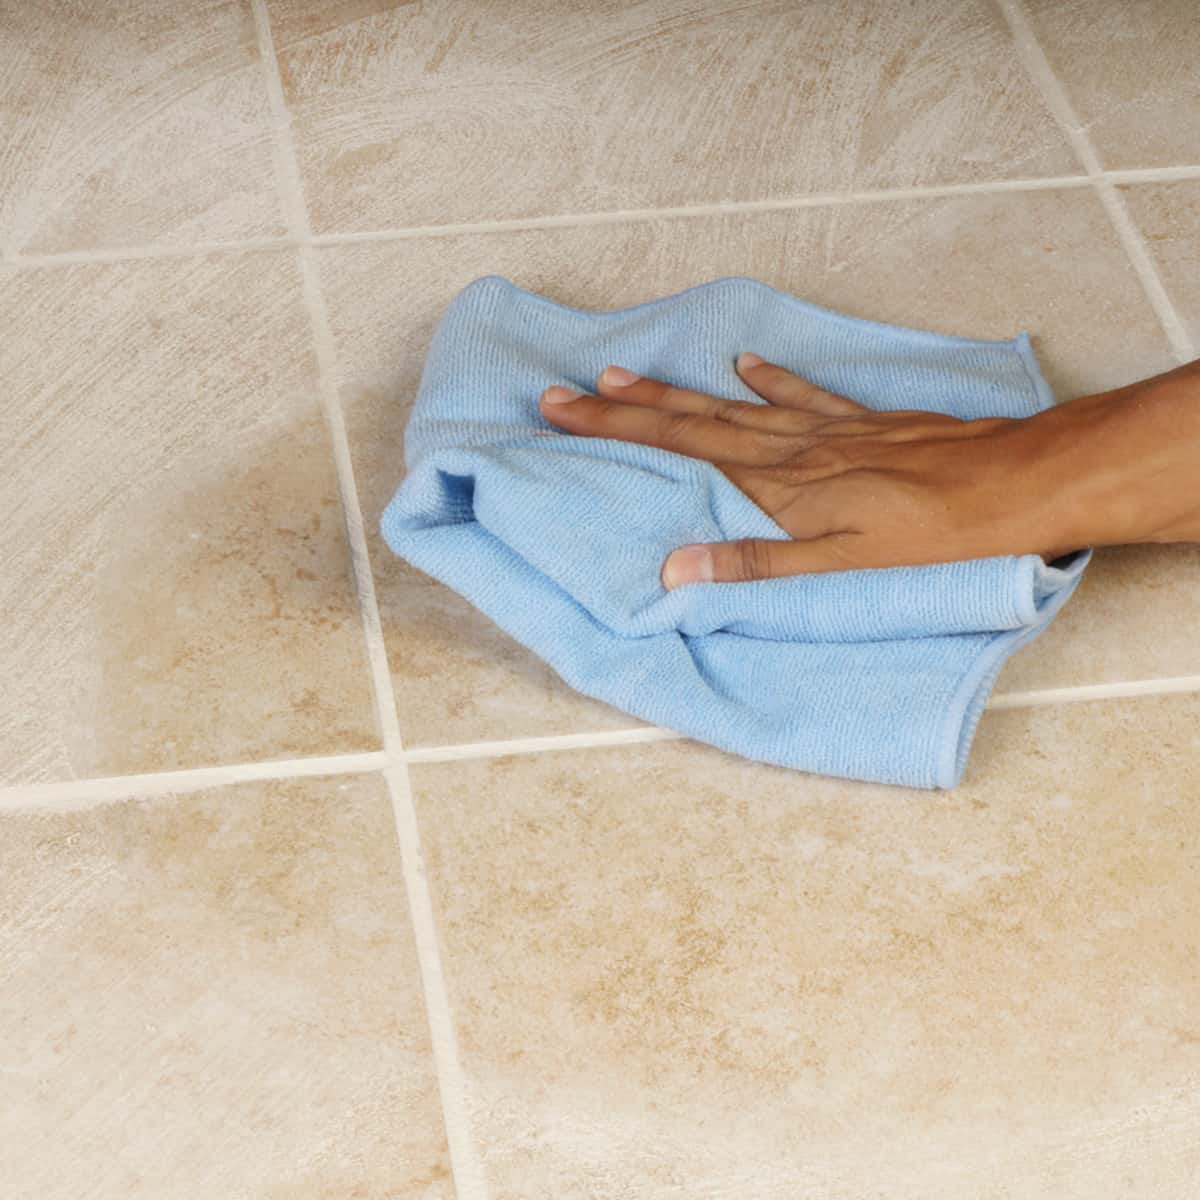 https://www.3plestar.nz/wp-content/uploads/2023/05/how-to-keep-your-tile-floors-sparkling-clean.jpg